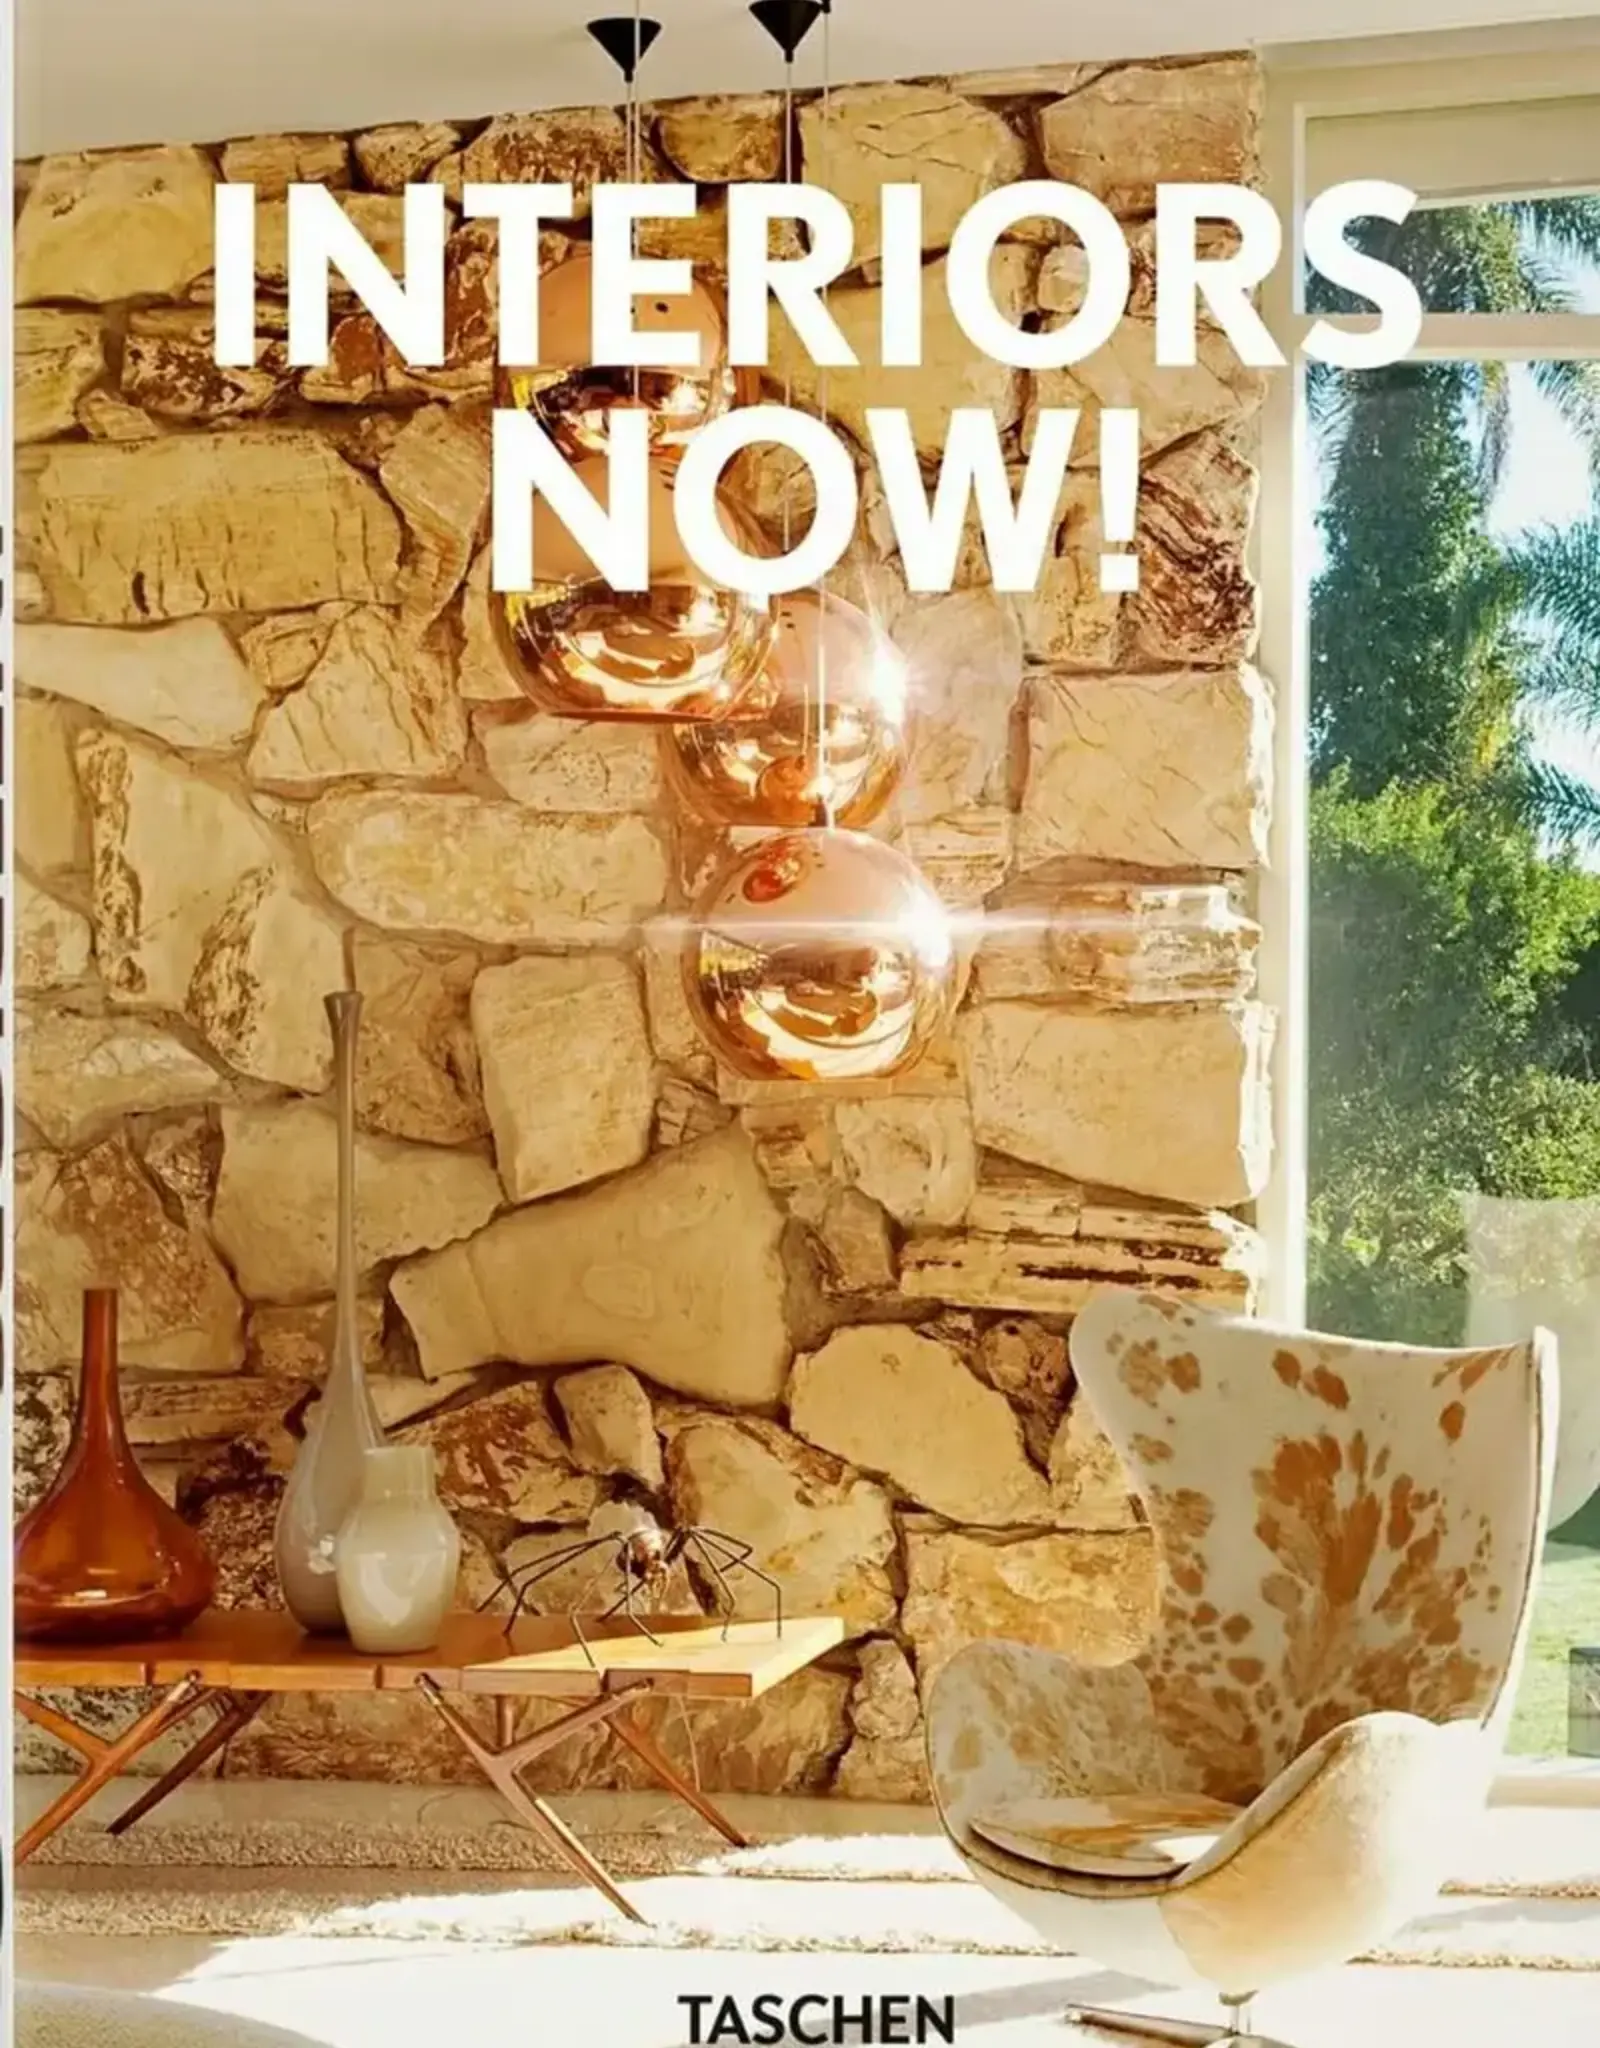 New Mags New Mags - Interiors now - 40th edition